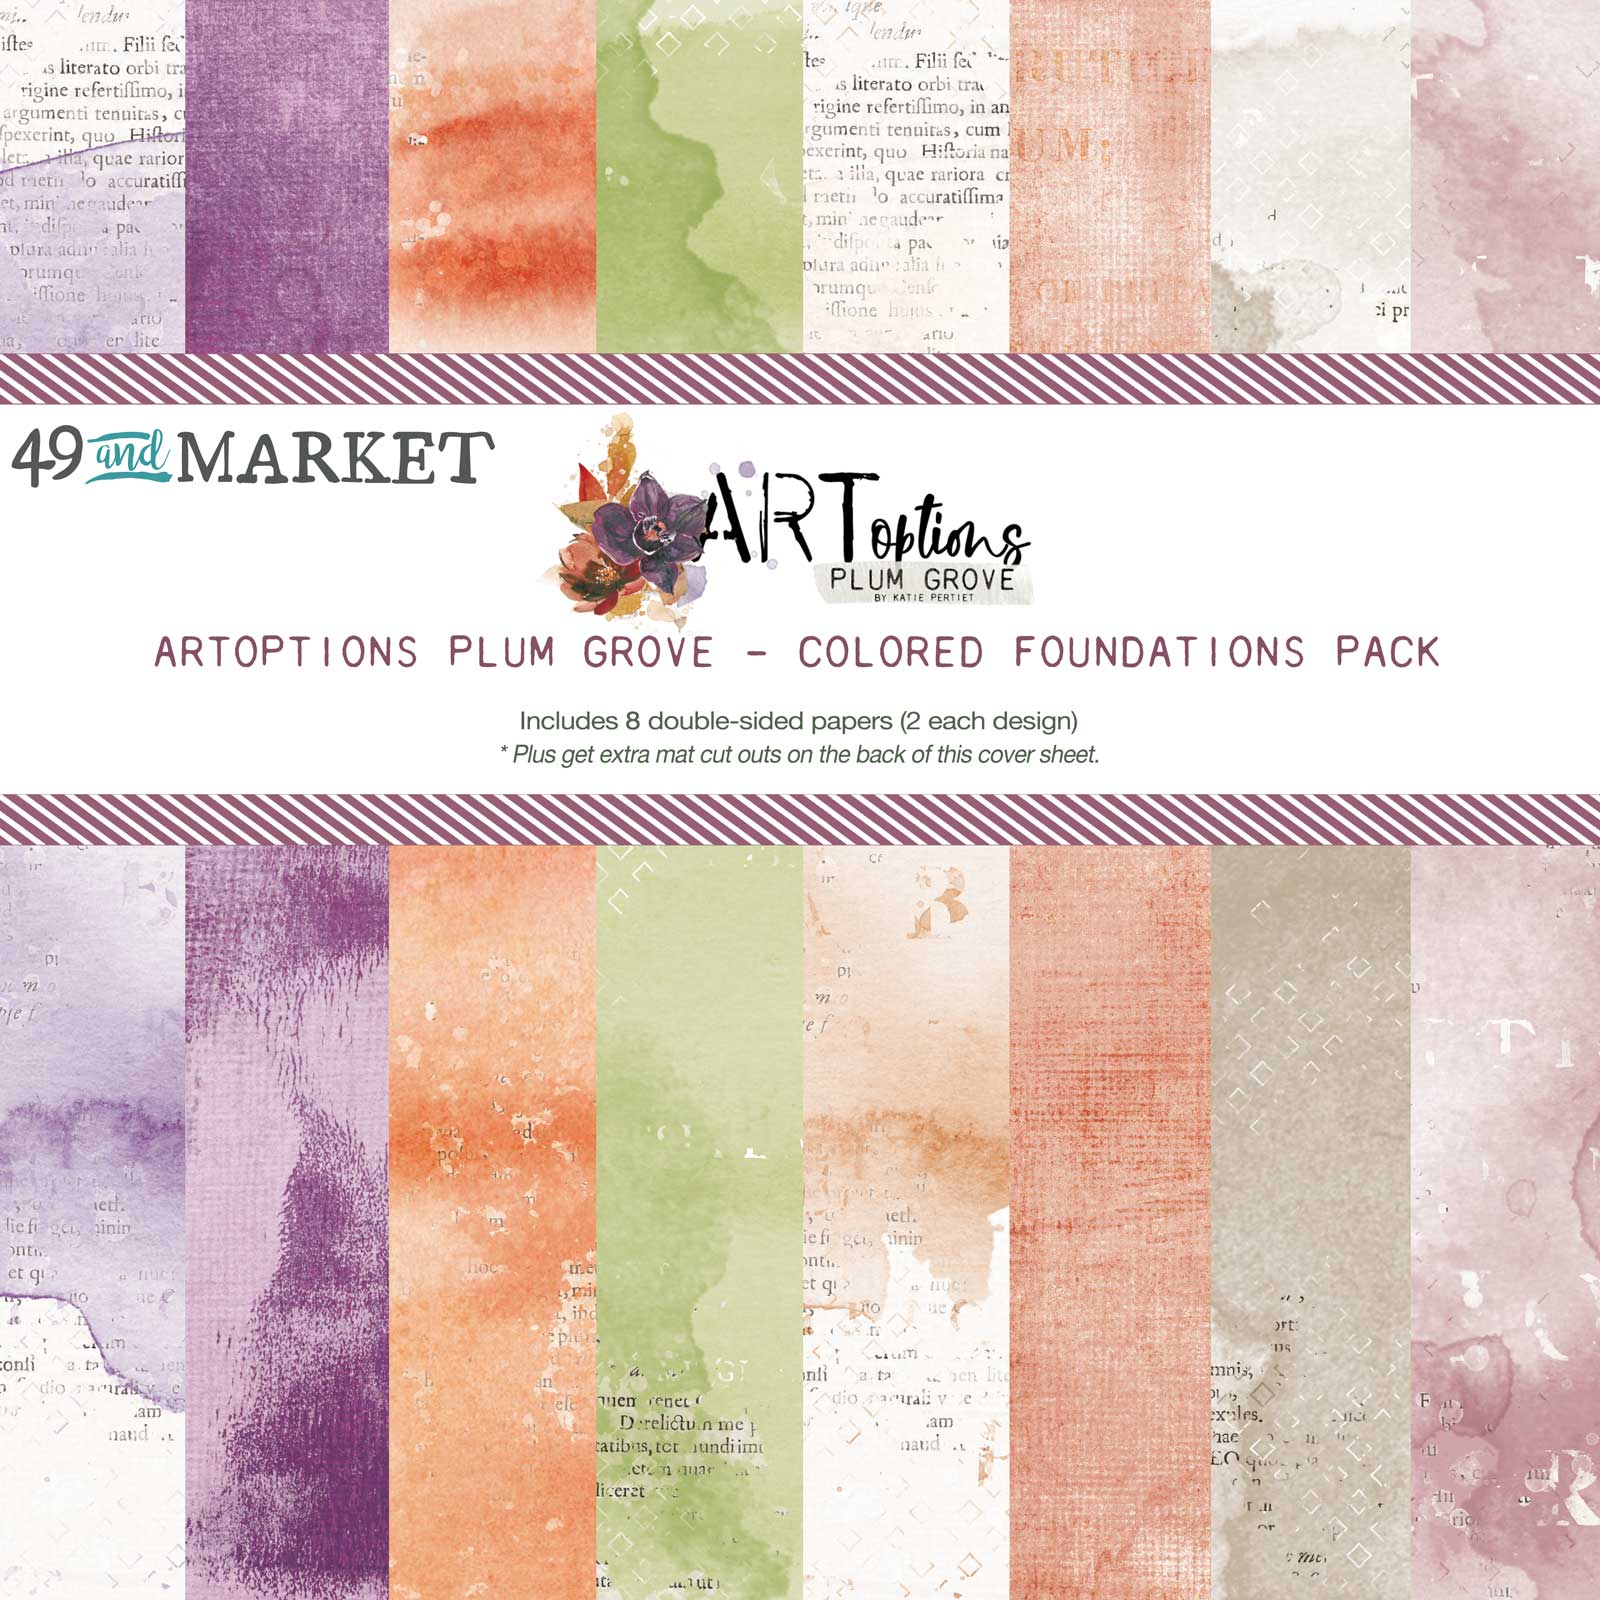 49 and Market- Art Options - Plum Grove Foundations pack